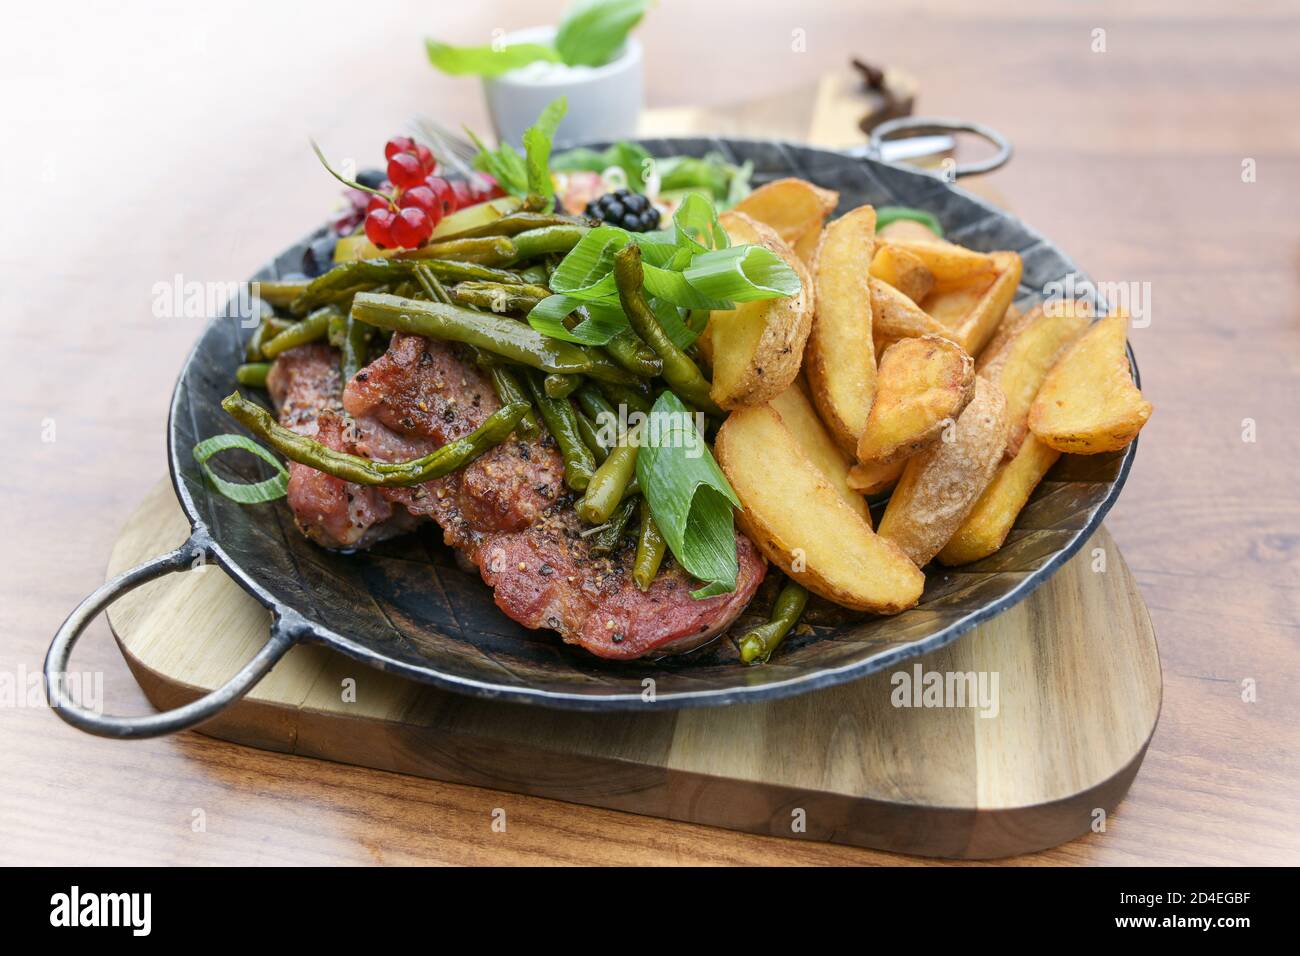 Rustic meal with roasted steak, potato wedges, green beans and a mixed salad with fruits, served in an iron cooking pan on a wooden table, selected fo Stock Photo